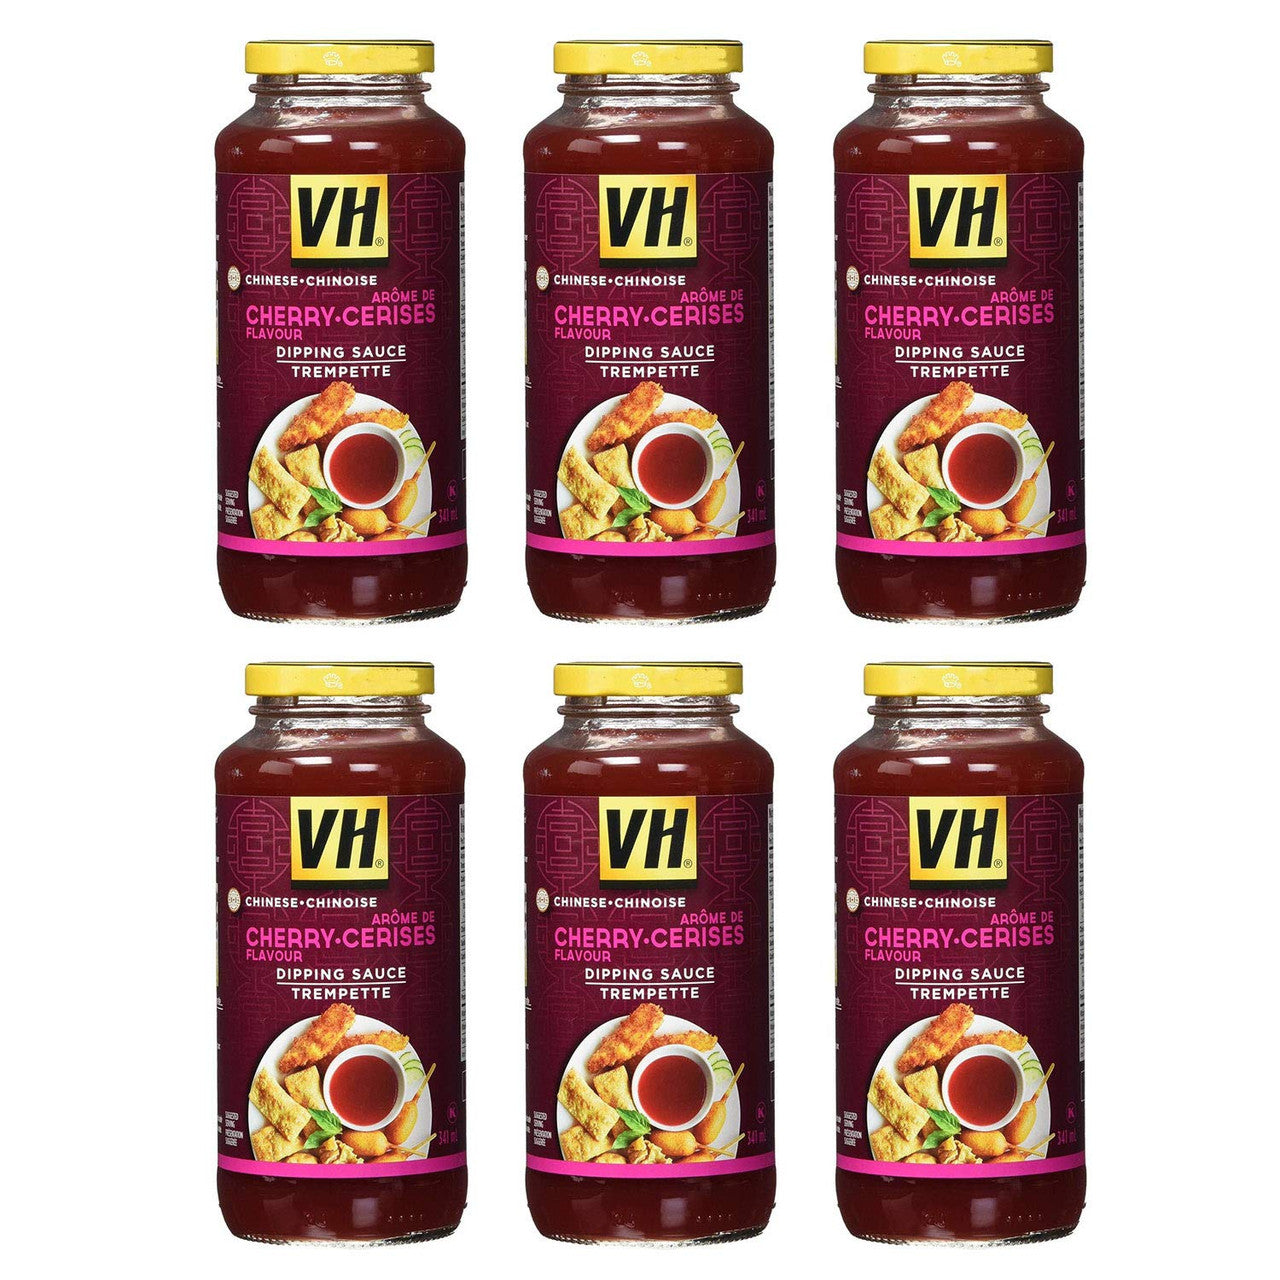 VH Cherry Dipping Sauce, 341ml/11.5oz, 6-Jars {Imported from Canada}